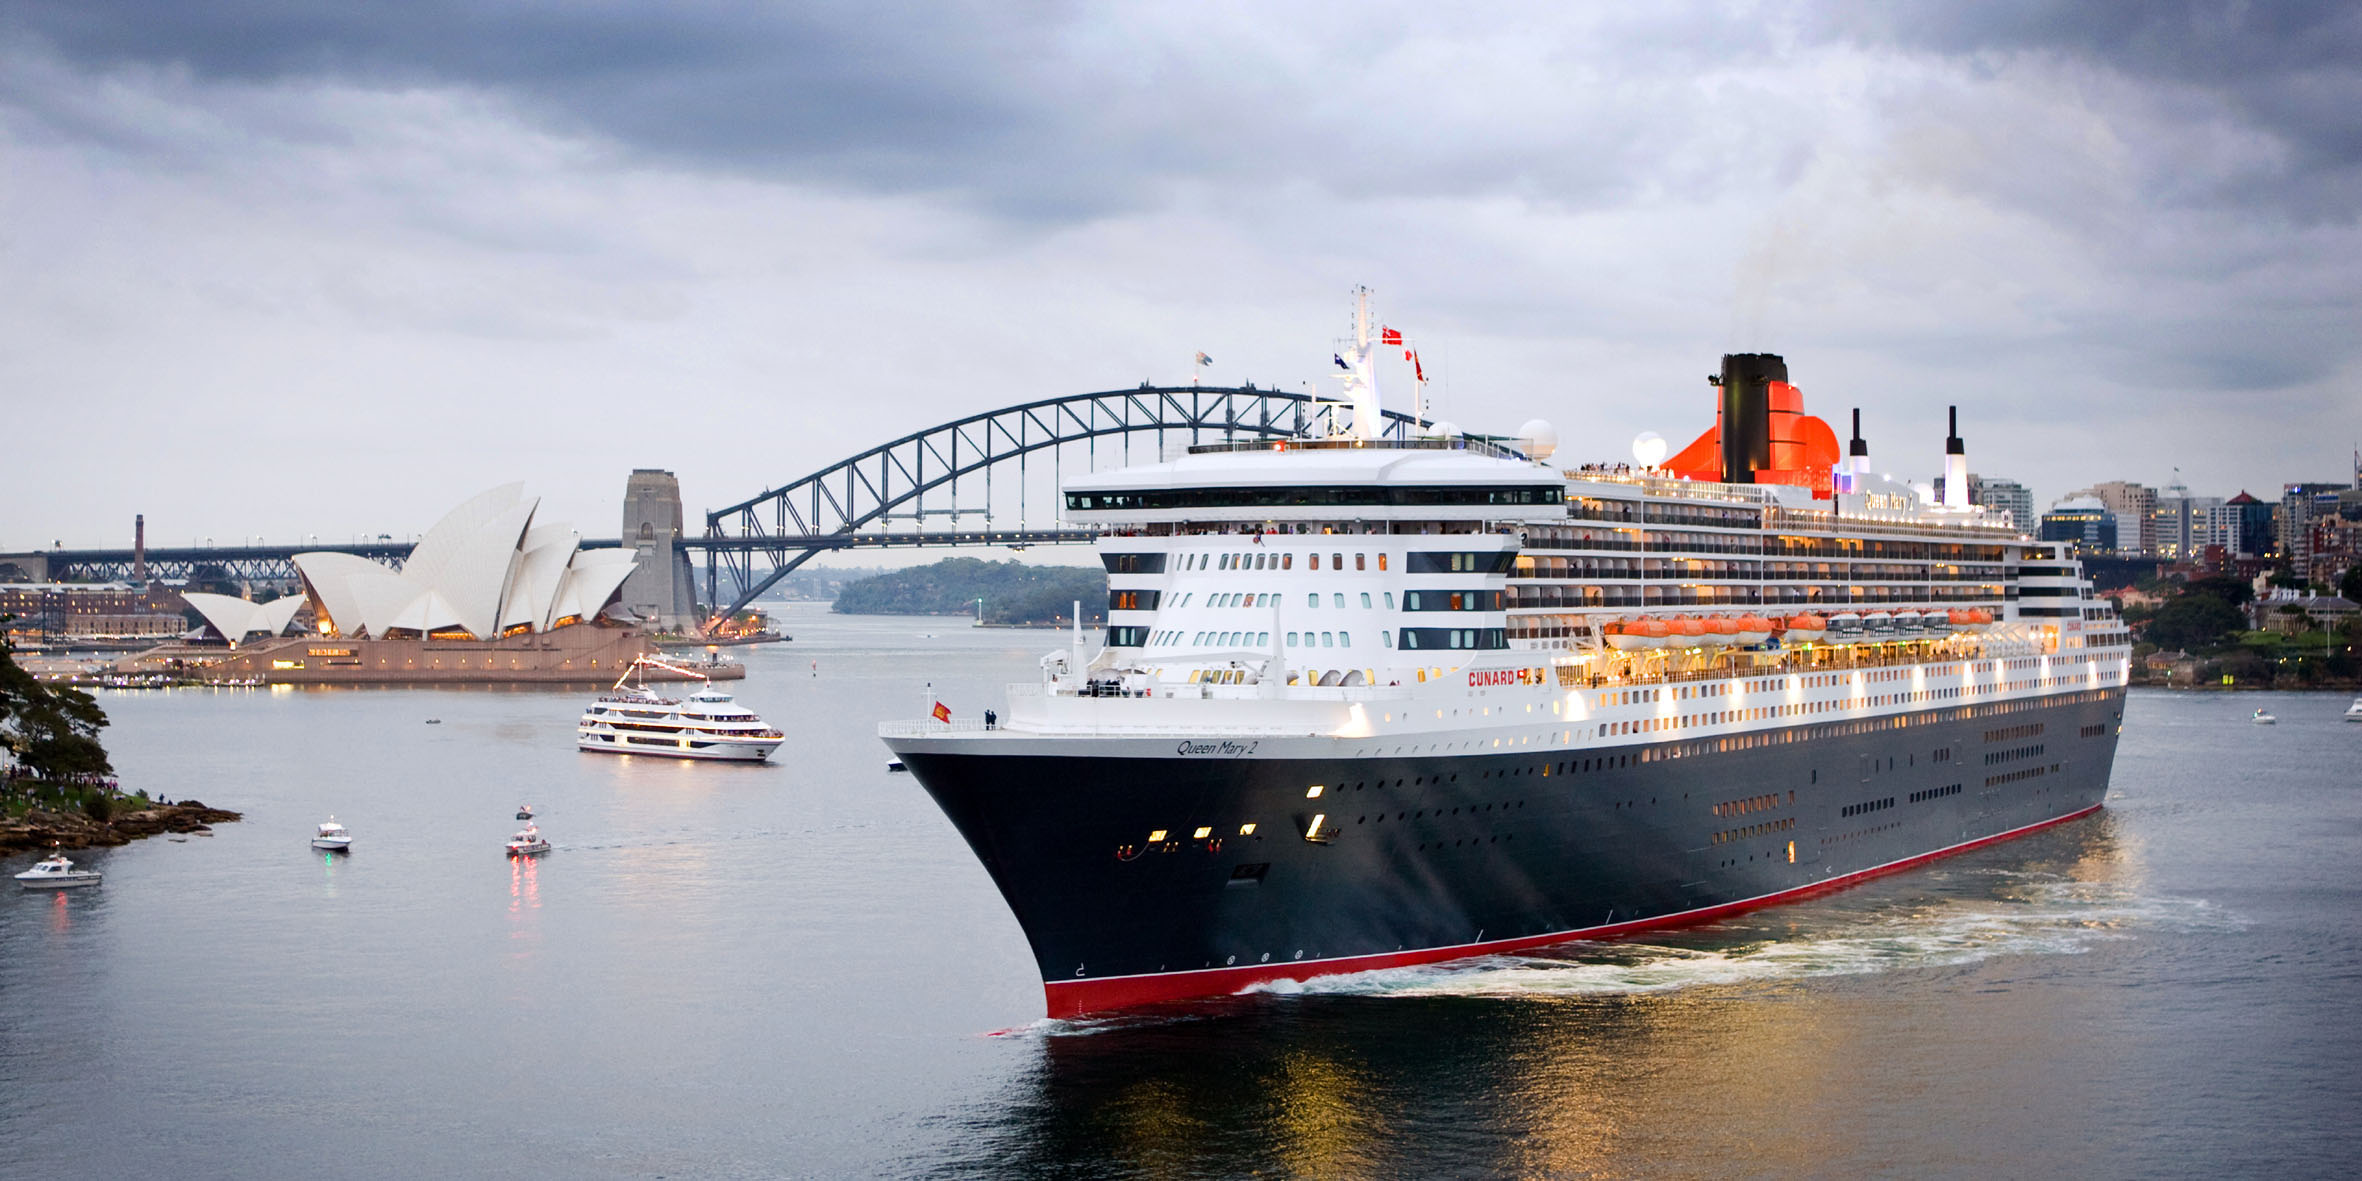 25 Stunning Pictures of the Queen Mary 2 Luxury Cruise Ship